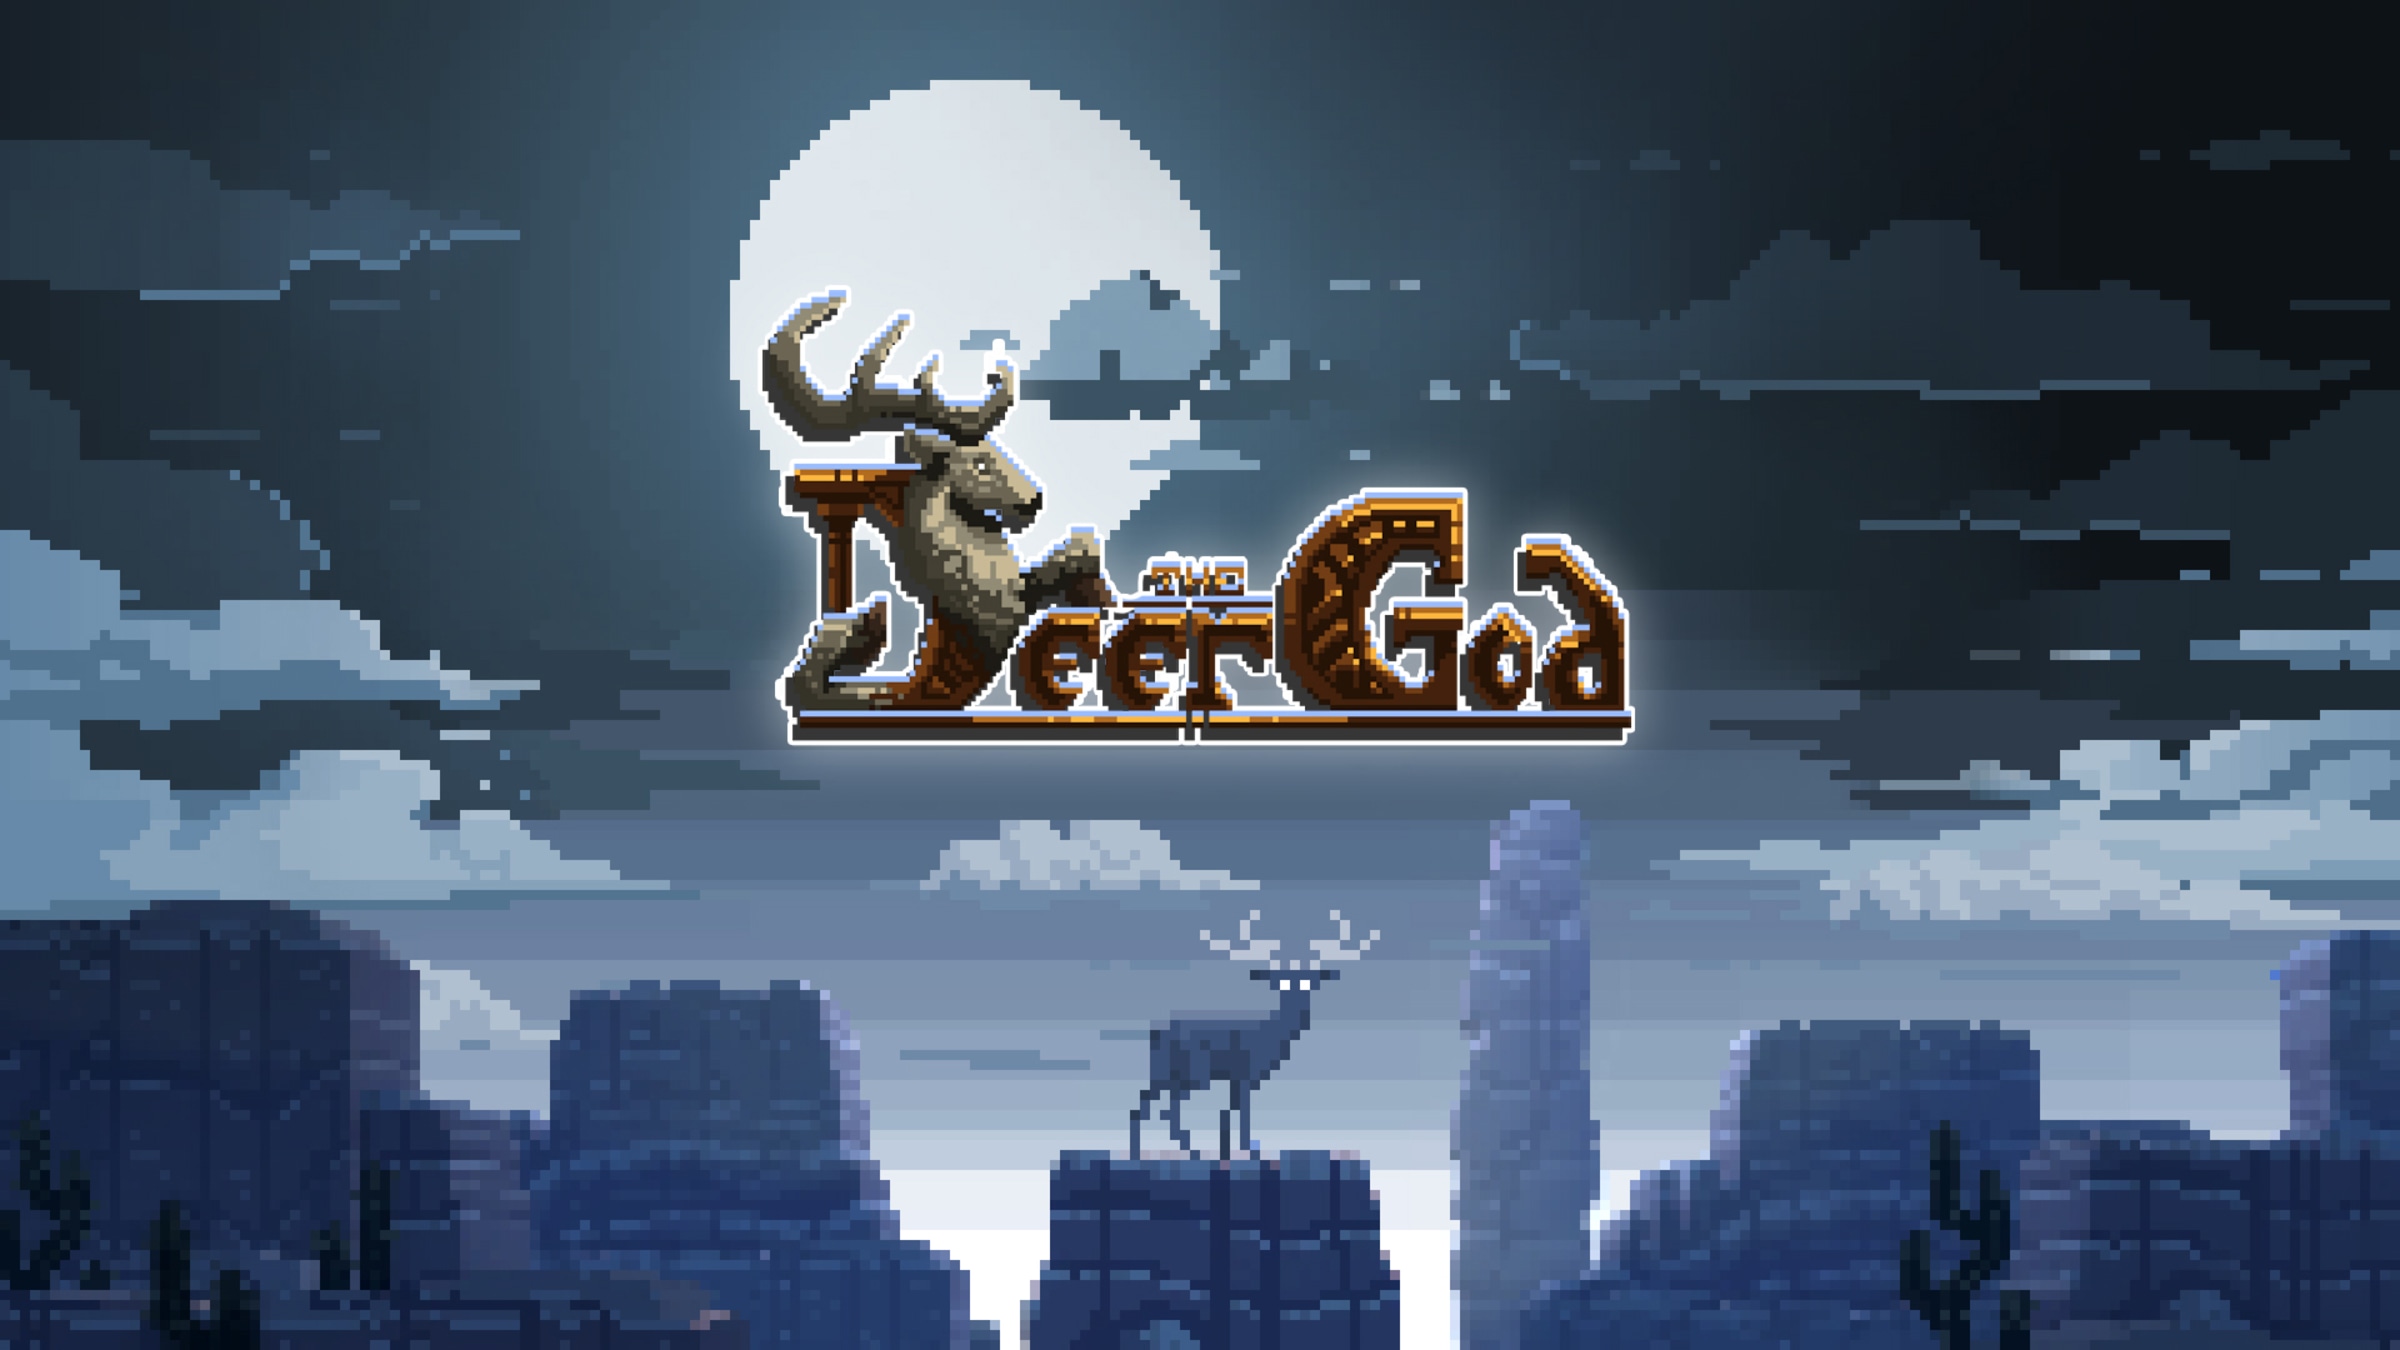 The Deer God for Nintendo Switch - Nintendo Official Site